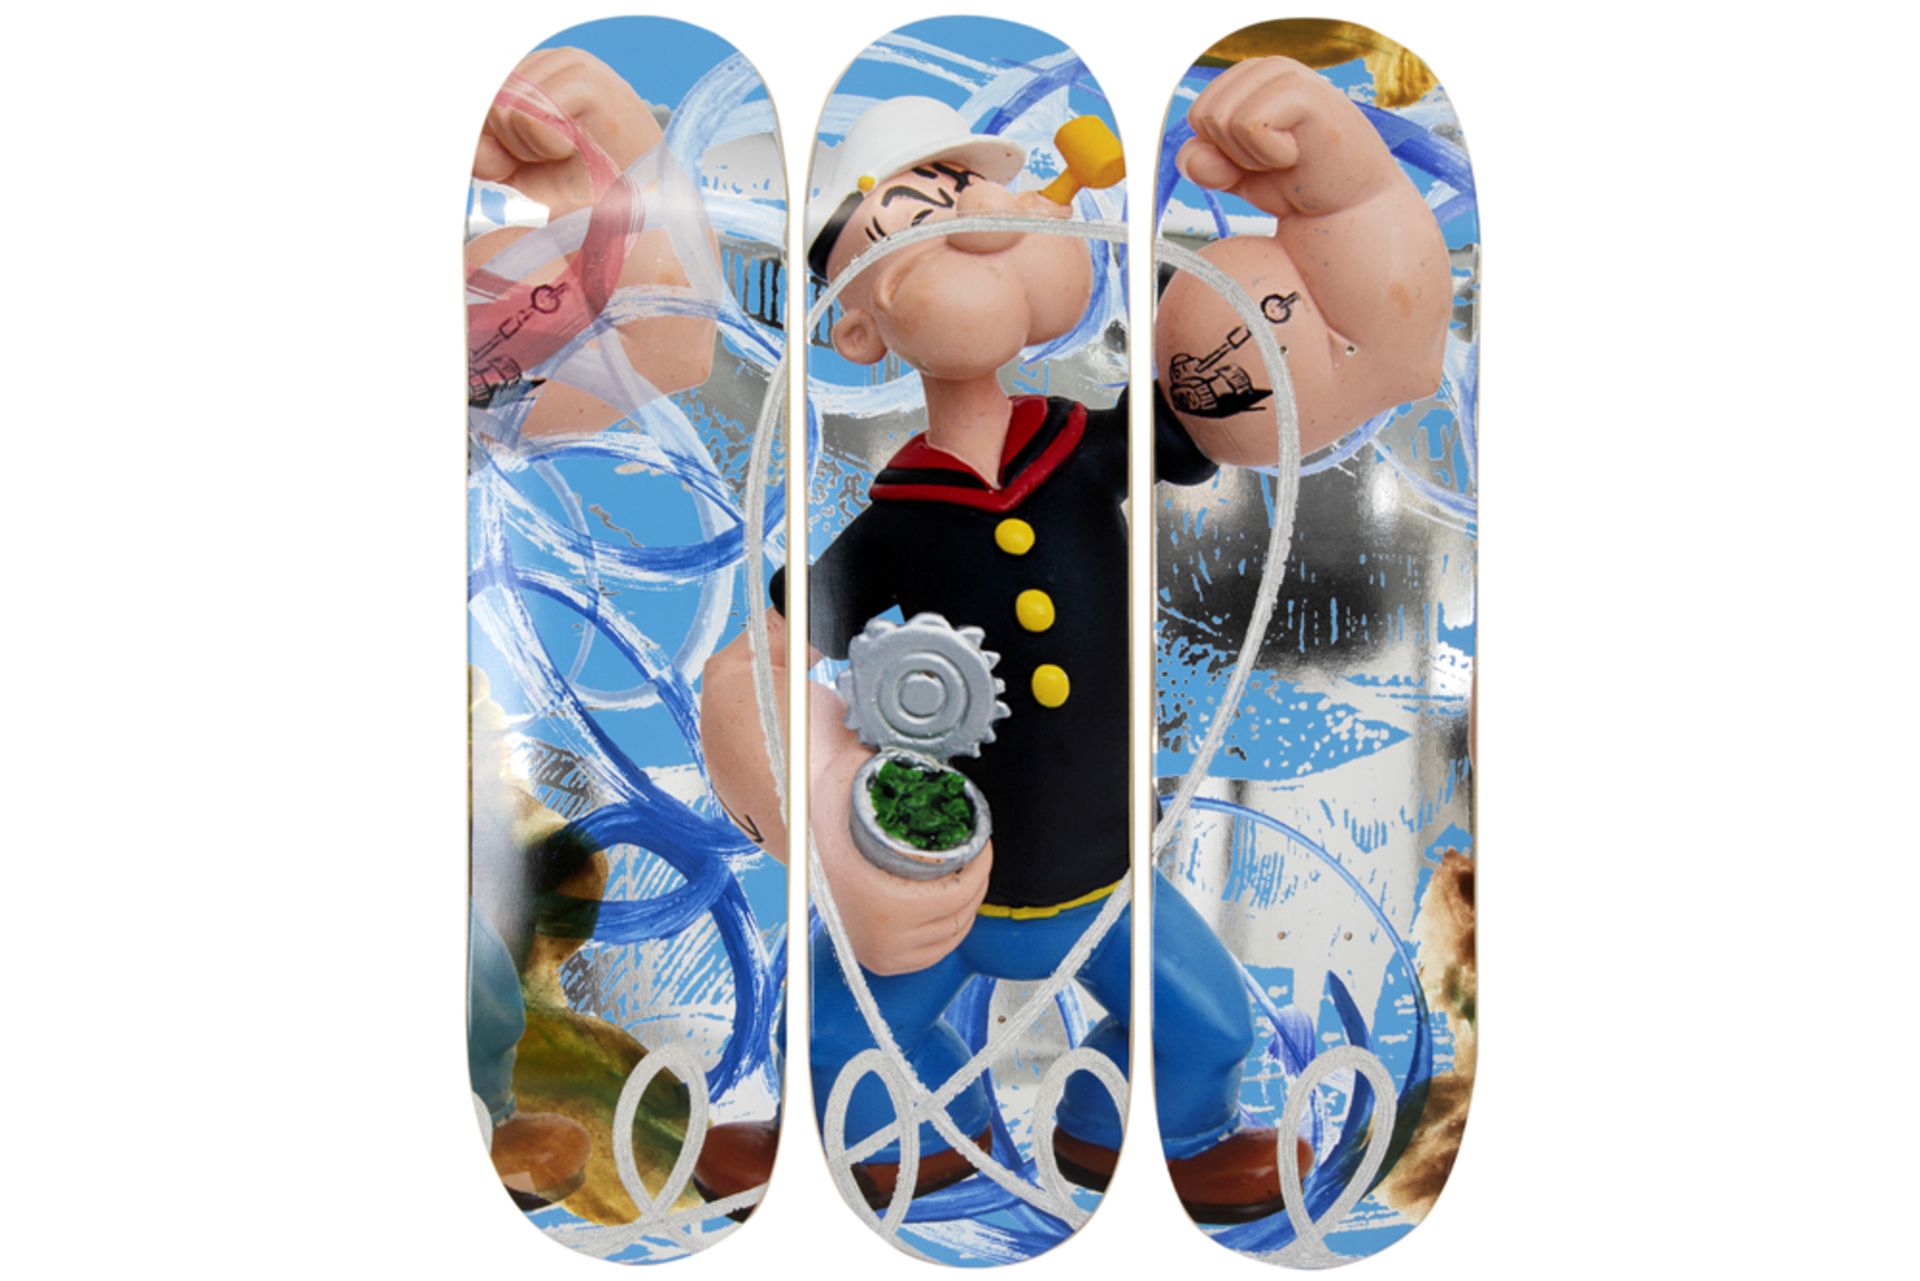 Jeff Koons plate signed "Popeye" triptych on skateboards dd 2021, an edition of 500 ex. with